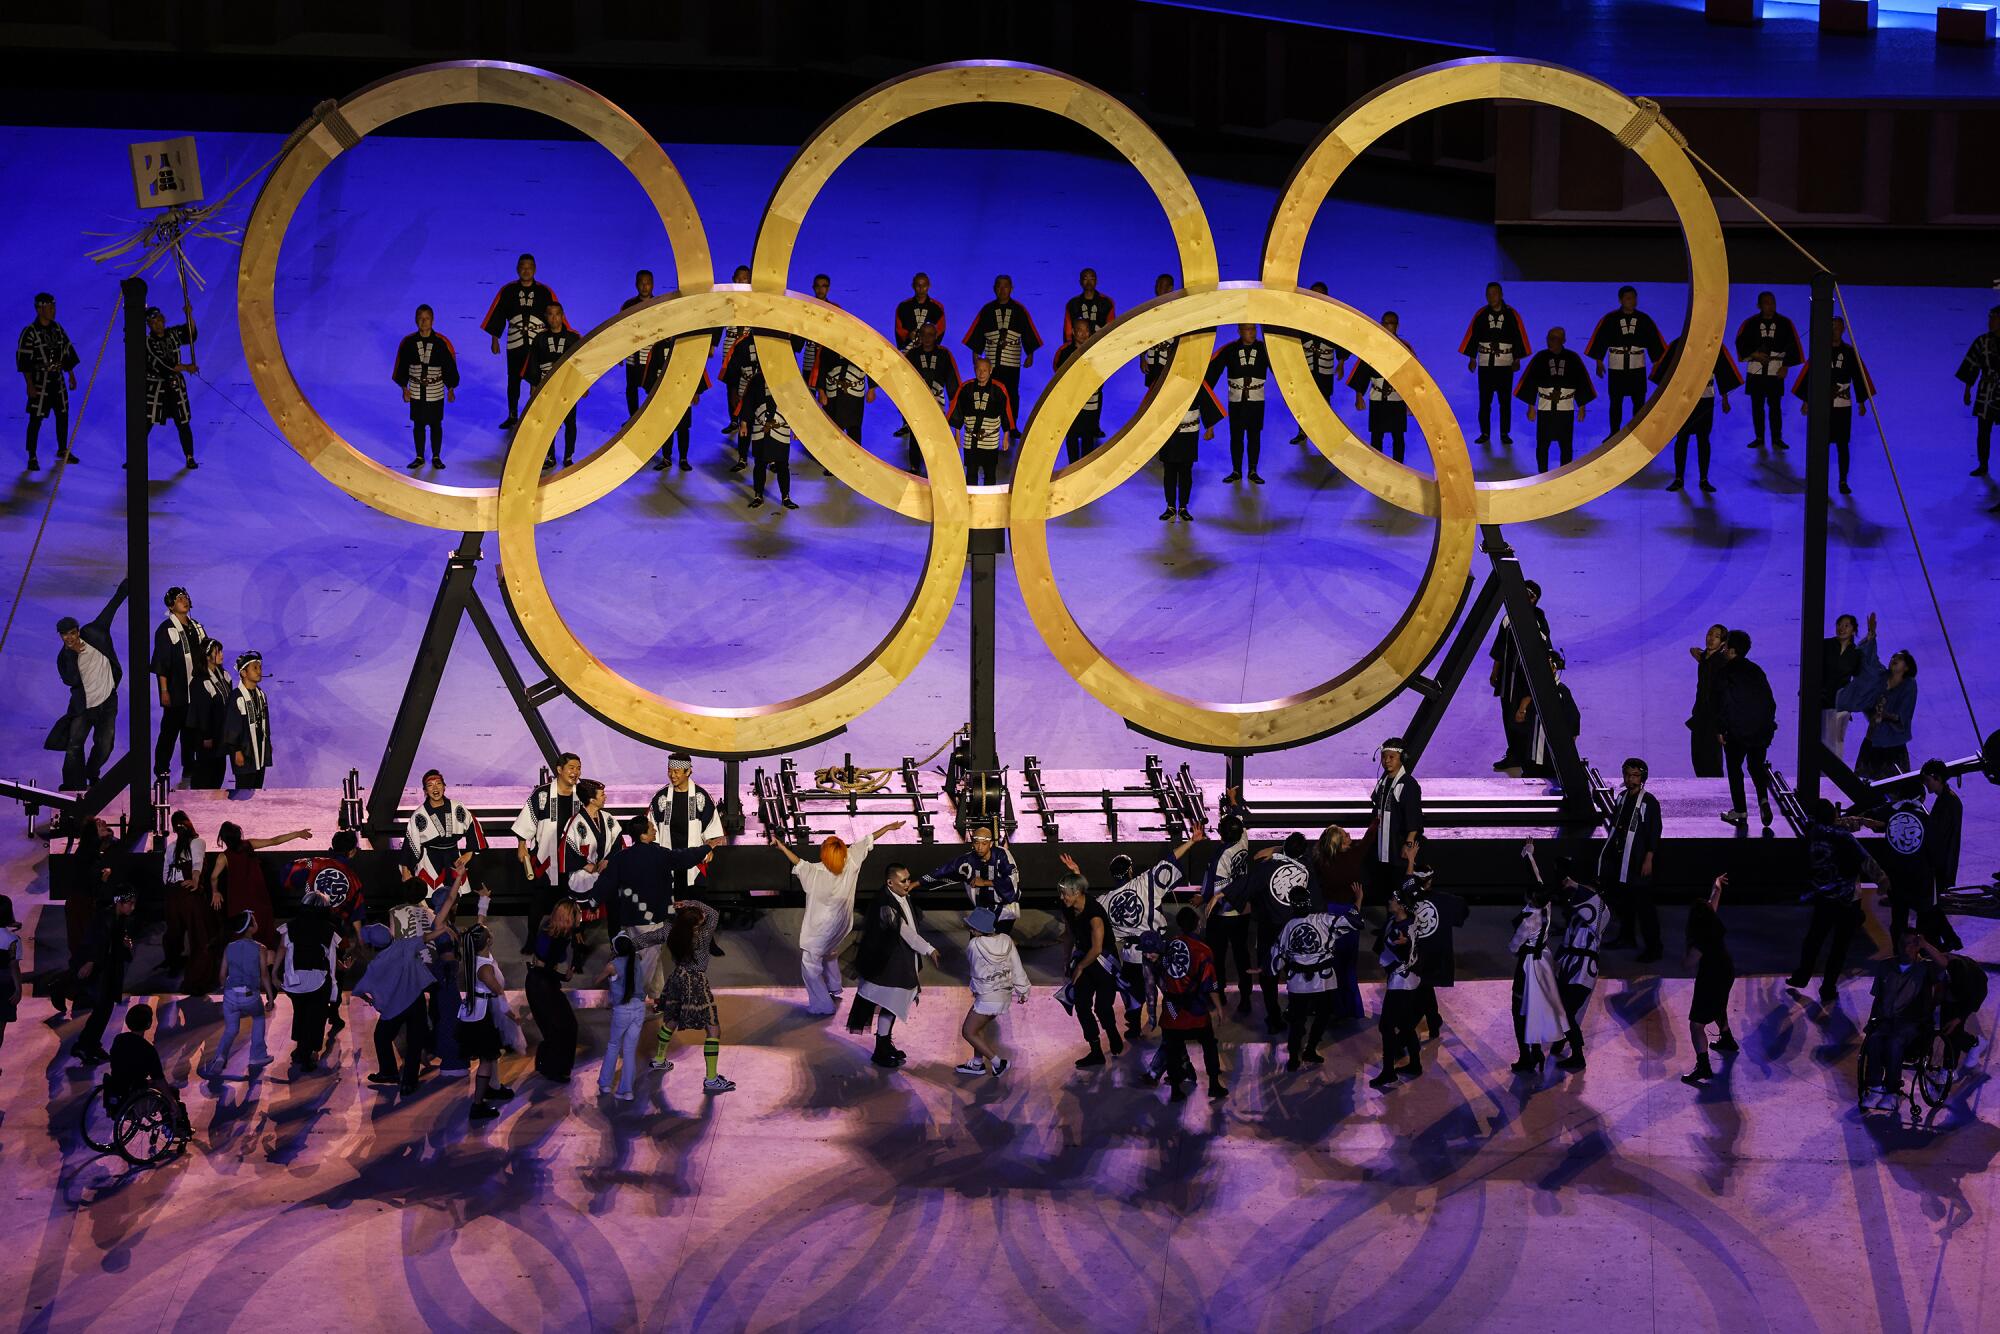 Olympic rings are assembled during an elaborate production number in the Tokyo Olympics opening ceremony.